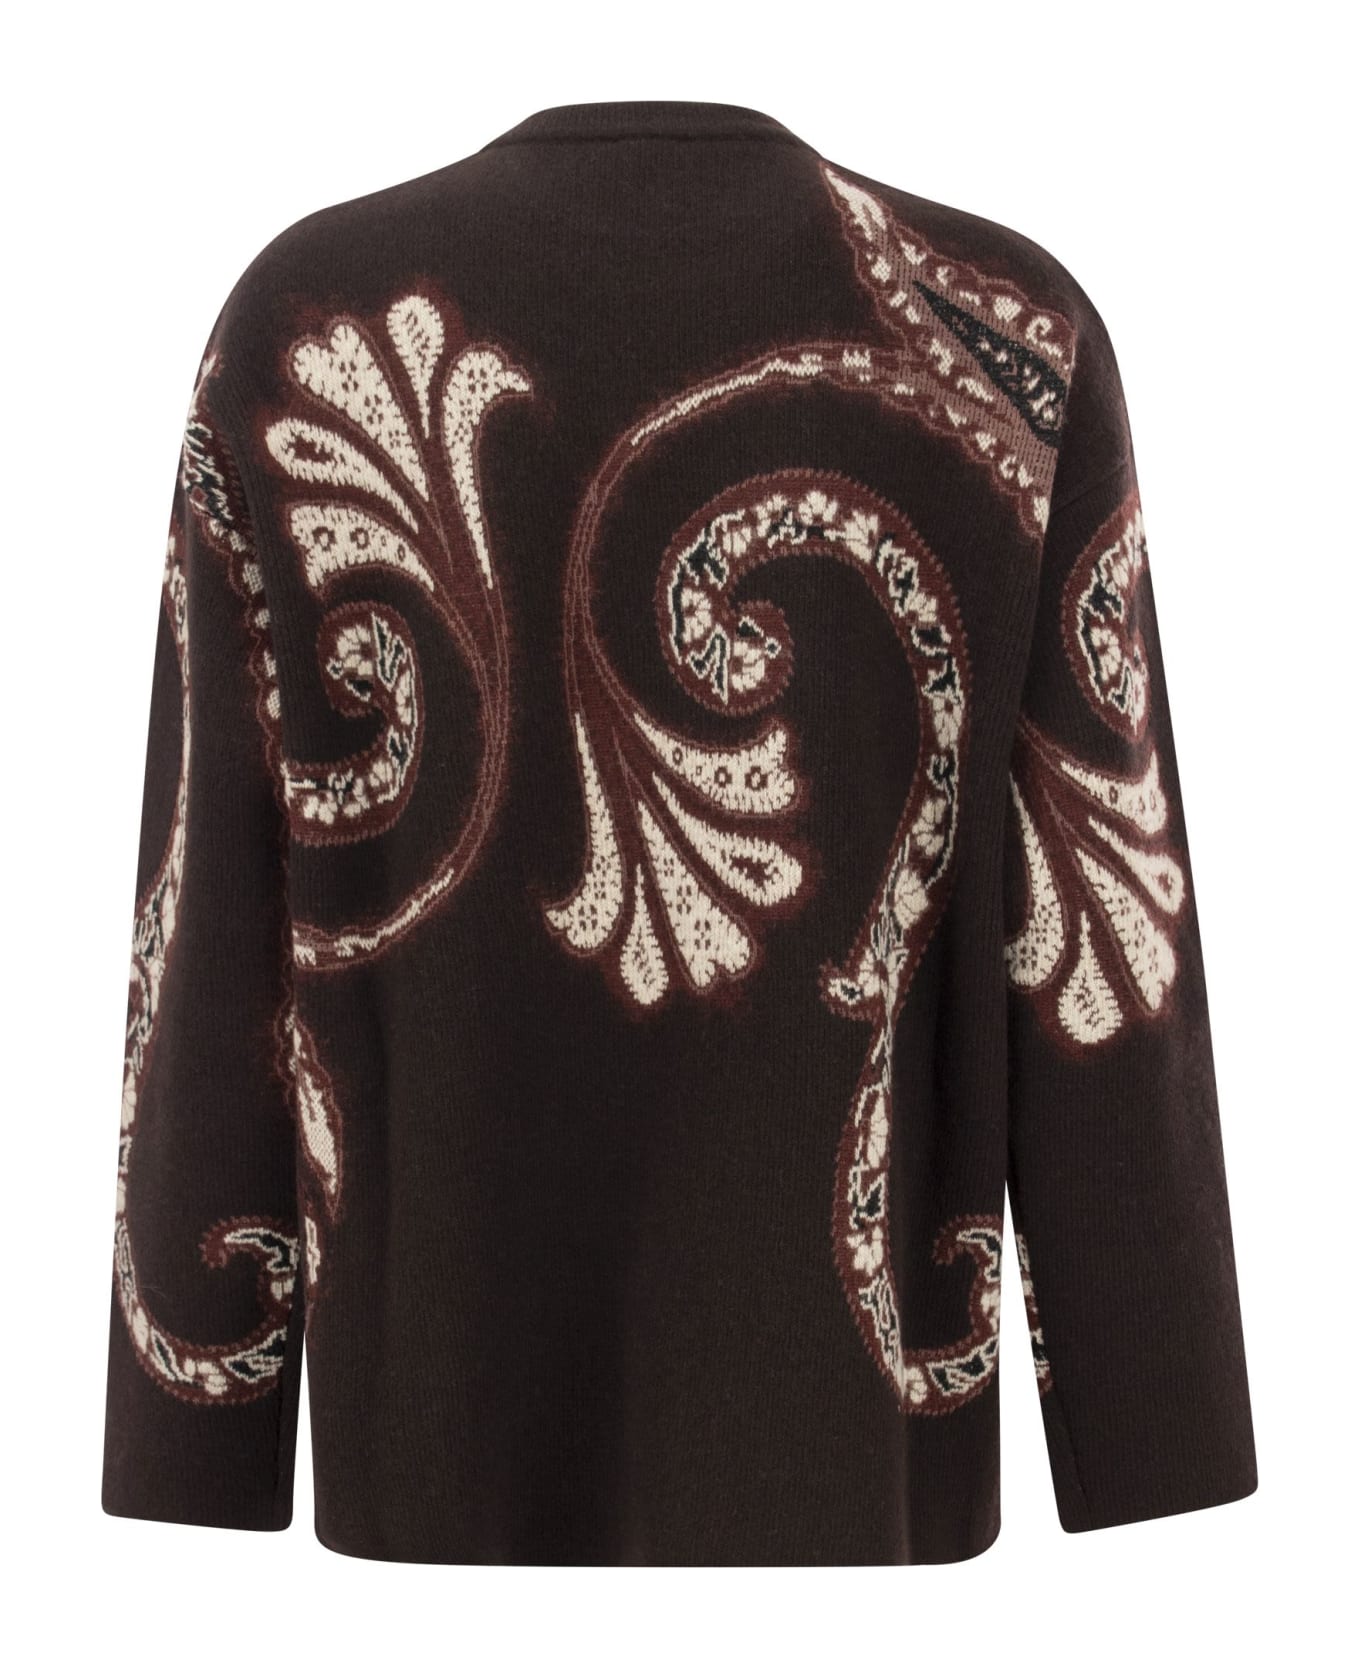 Etro Wool Sweater With Foliage Print - Bordeaux